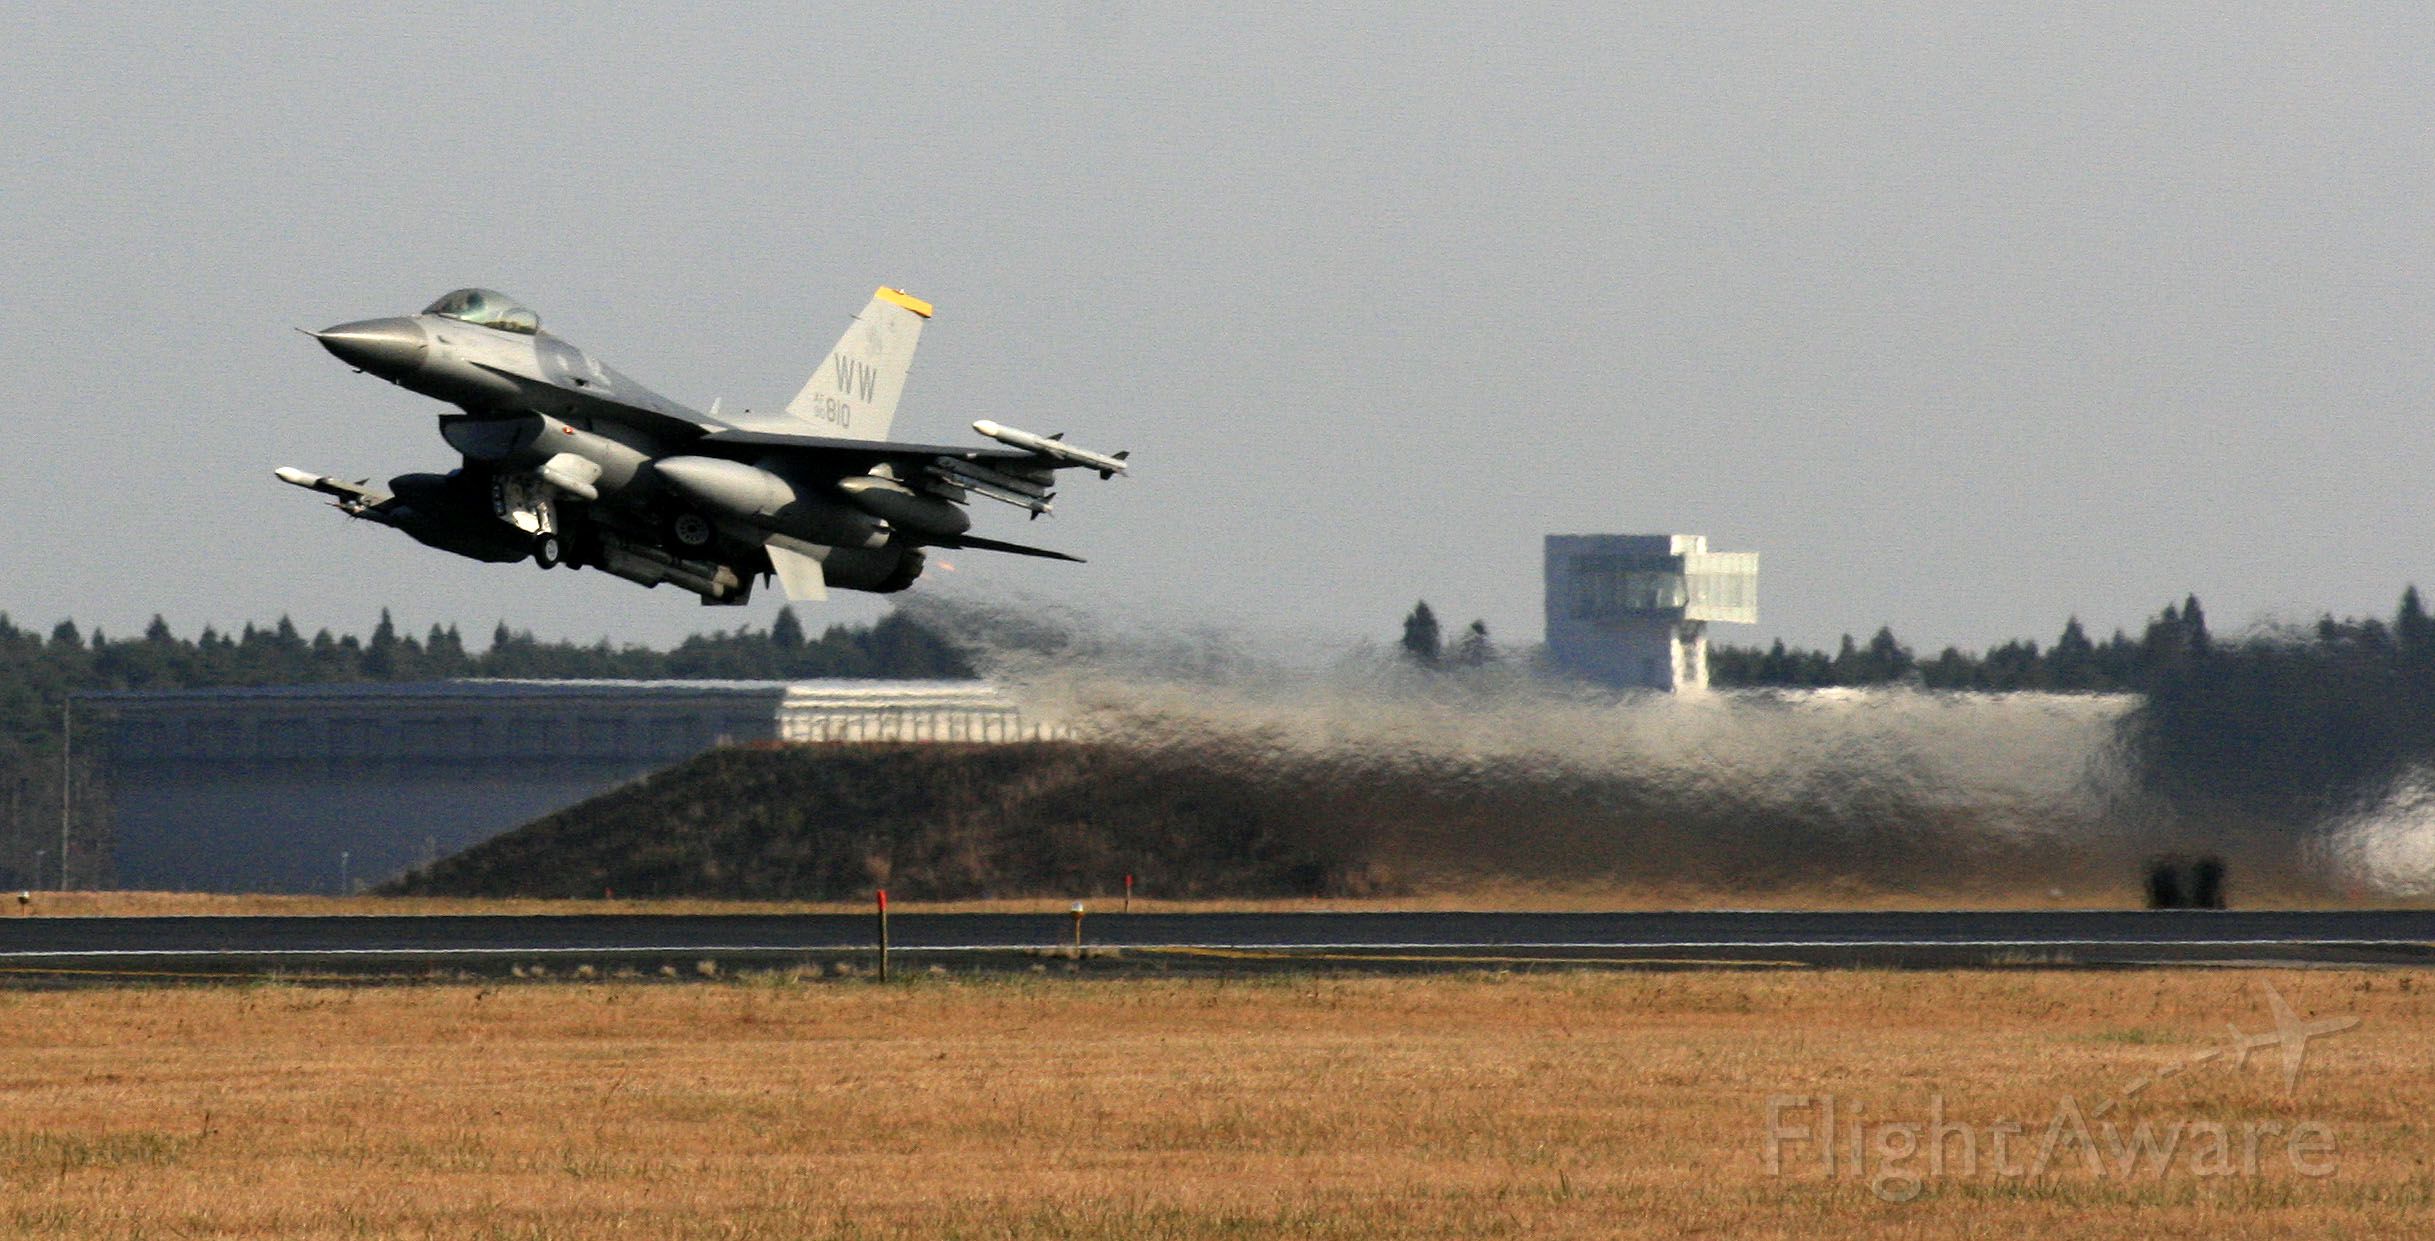 — — - F-16-Falcon taking off from Misawa